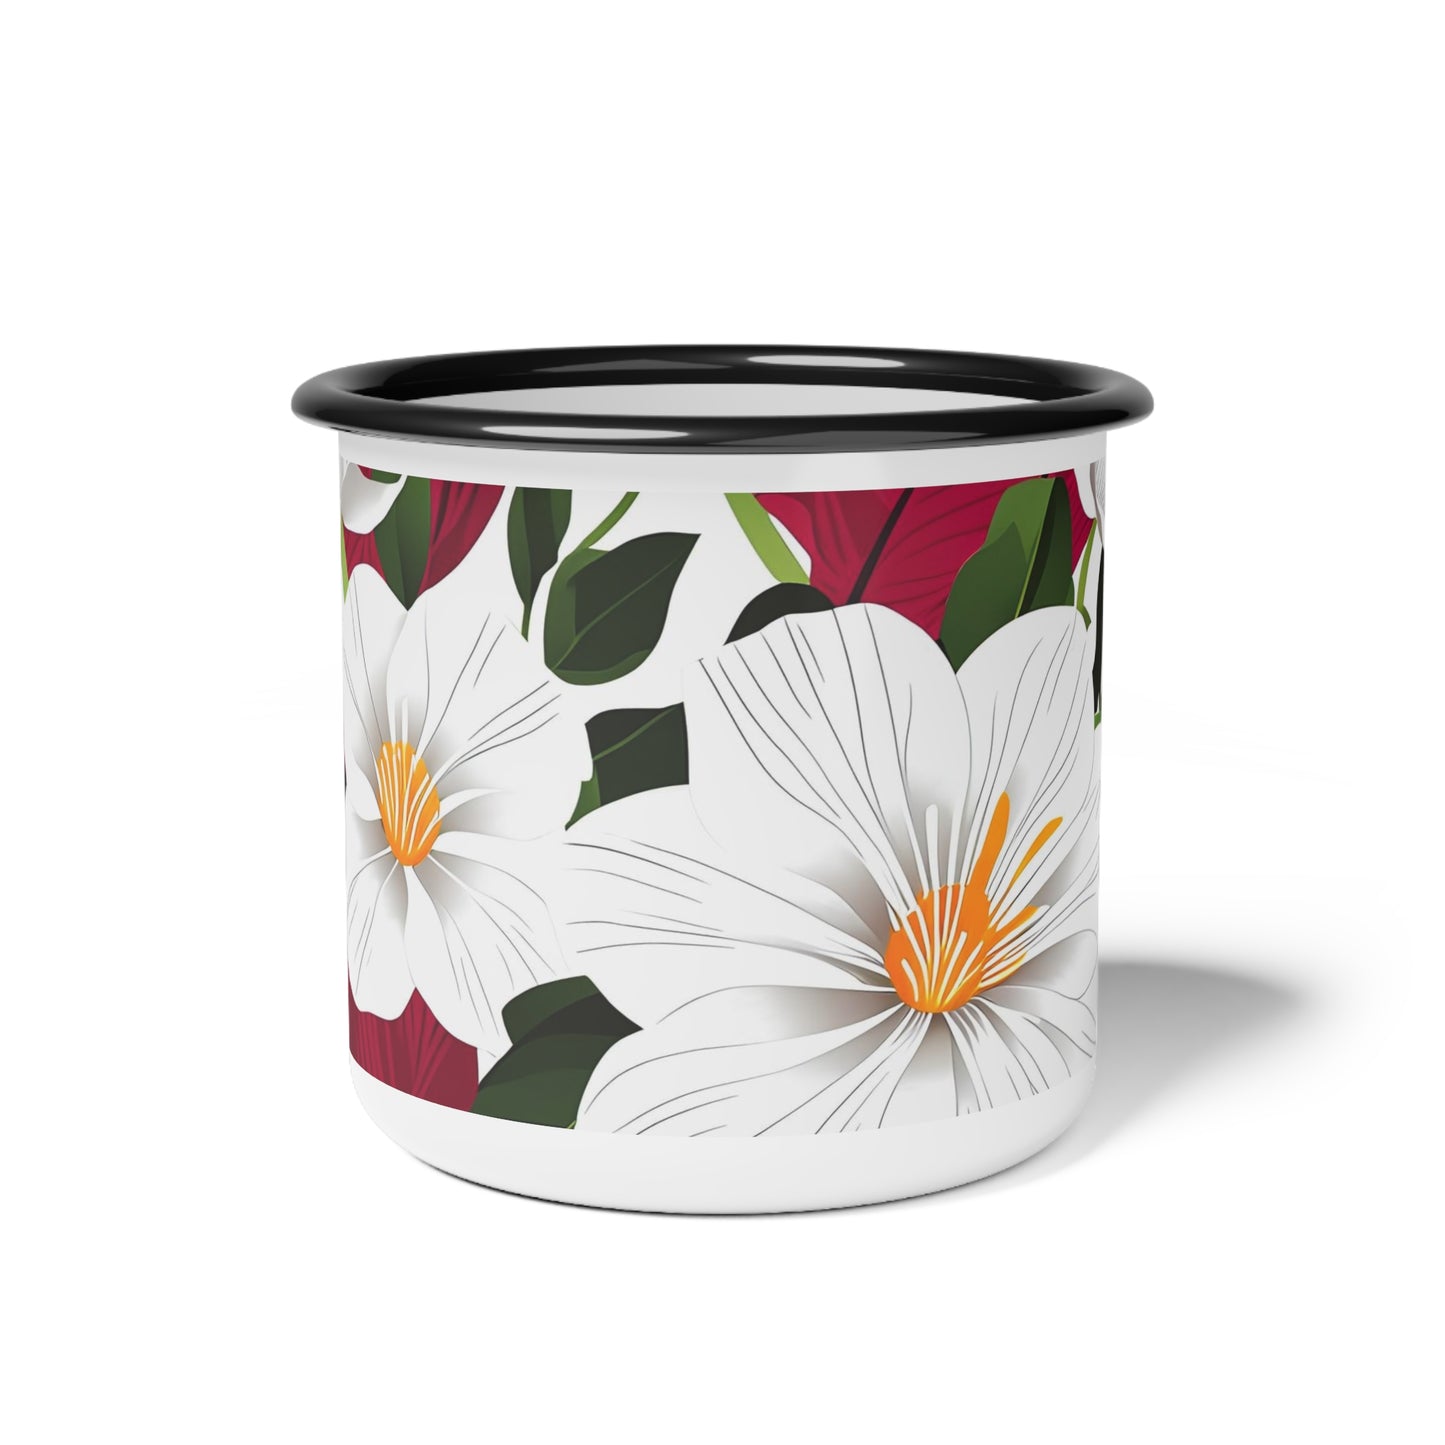 12oz Enamel Camping Mug for Coffee, Tea, Hot Cocoa, or Cereal - White Flowers on Red